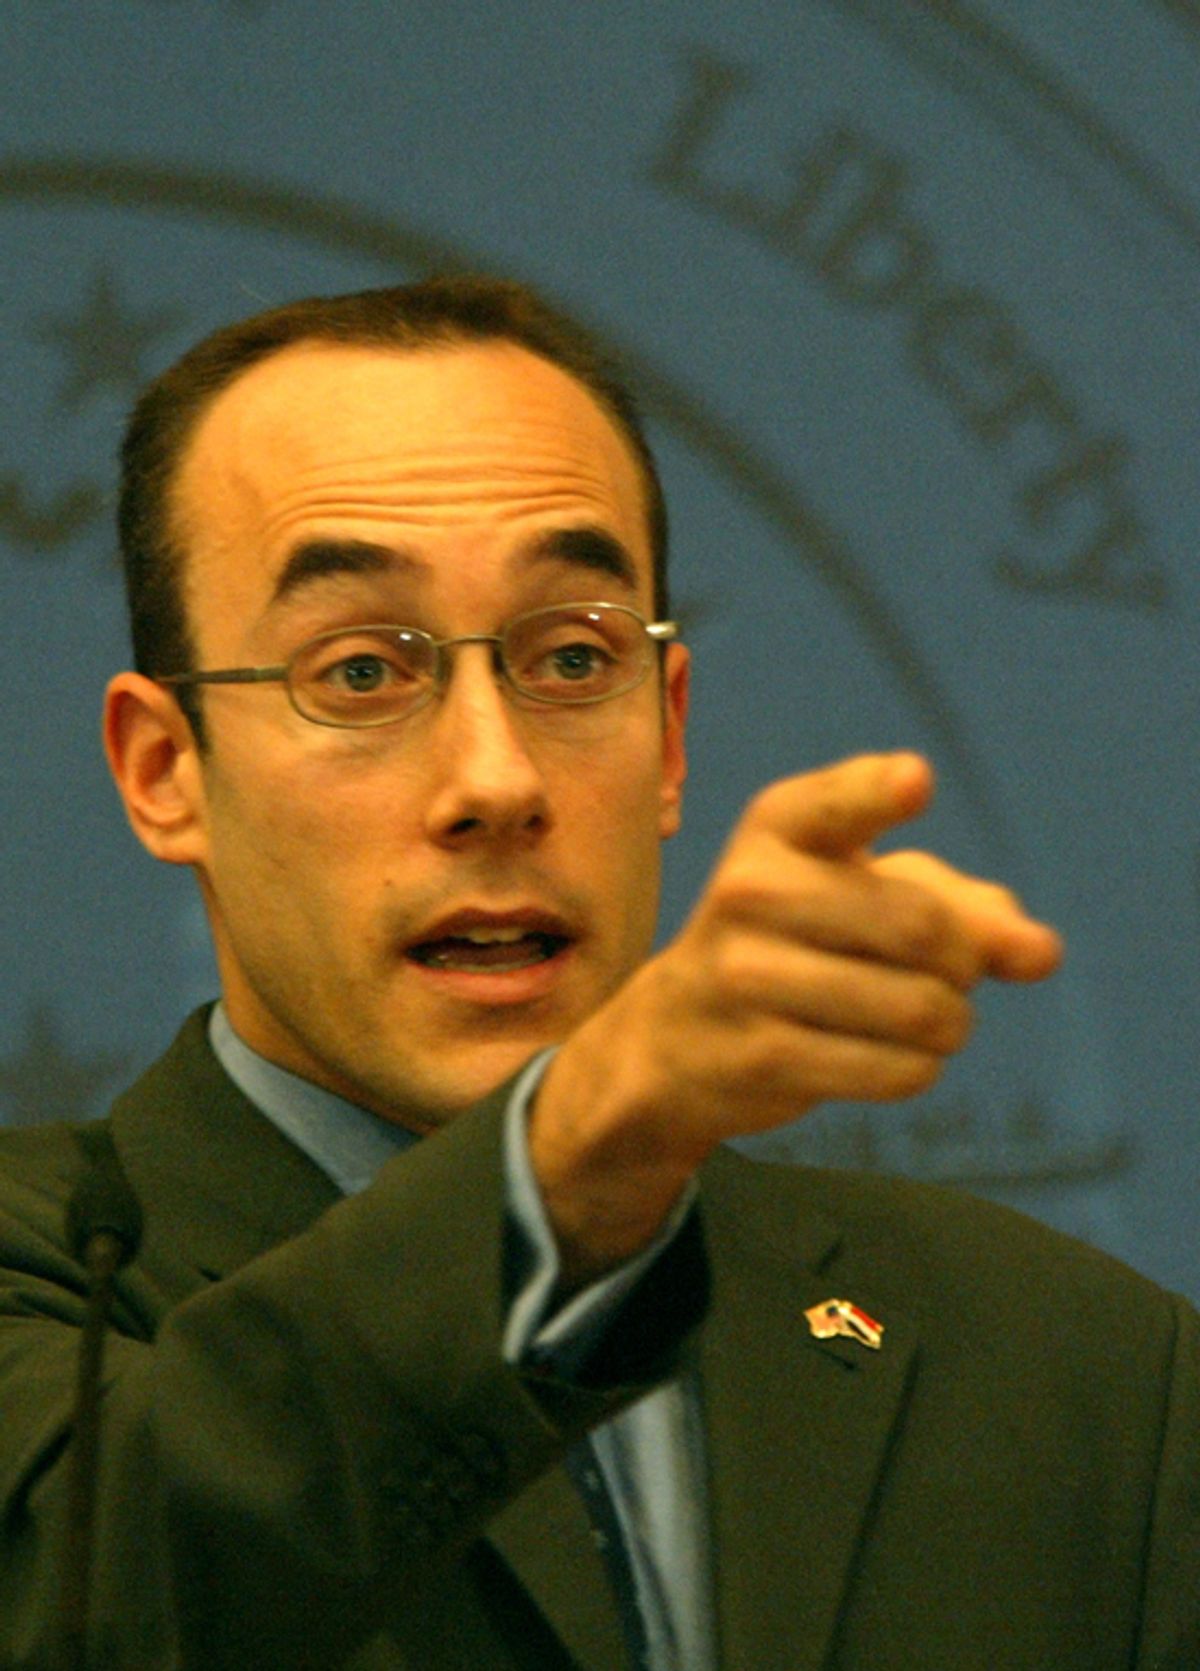 Dan Senor the spokesman for the U.S.-led Coalition Provisional Authority takes questions from journalists during news conference at the coalition forces headquarters in Baghdad February 3, 2004. The United States is committed to a July 1 handover of power in Iraq, despite Sunday's suicide bombings against key Kurdish allies, and is actively weighing compromise proposals for the transition, U.S. officials and experts said on Monday. REUTERS/Peter Andrews  PA (Â© Reuters Photographer / Reuters)